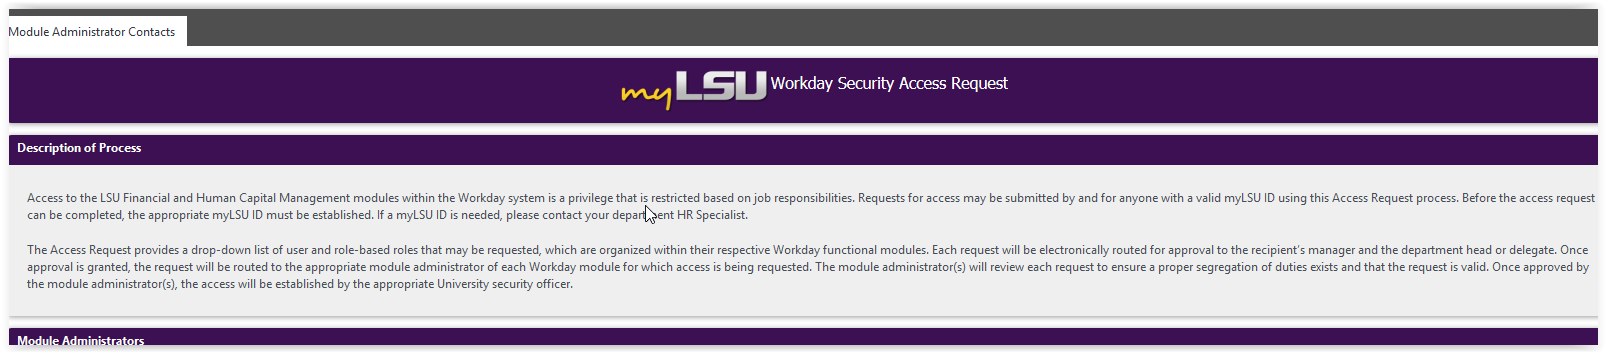 Workday Security Access Request page